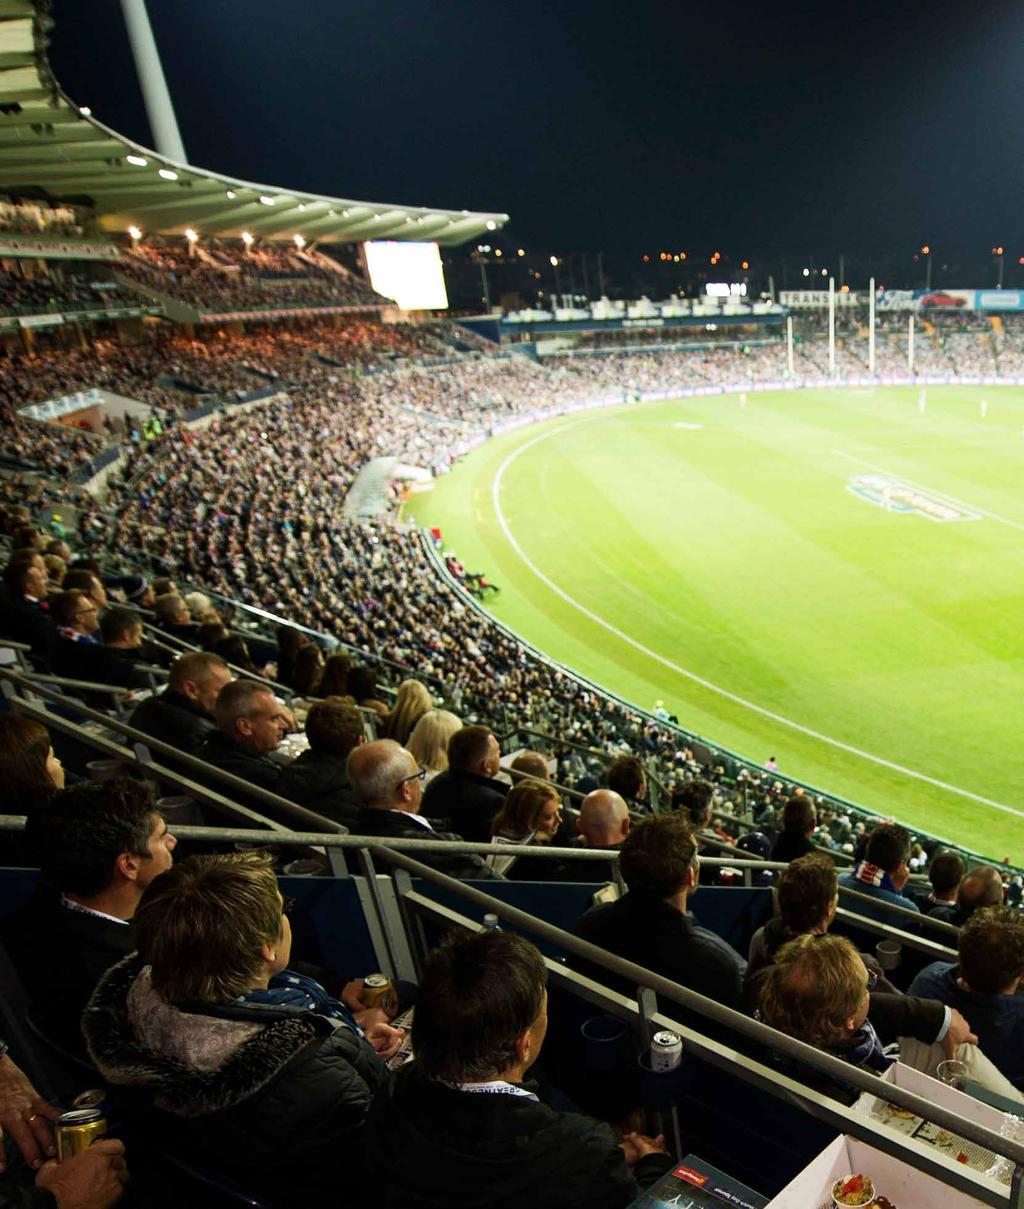 OPEN AIR BOX Love being amongst the electric atmosphere of a game at Stadium, but want your own exclusive space? Take your footy experience to the next level with an Open Air Box.